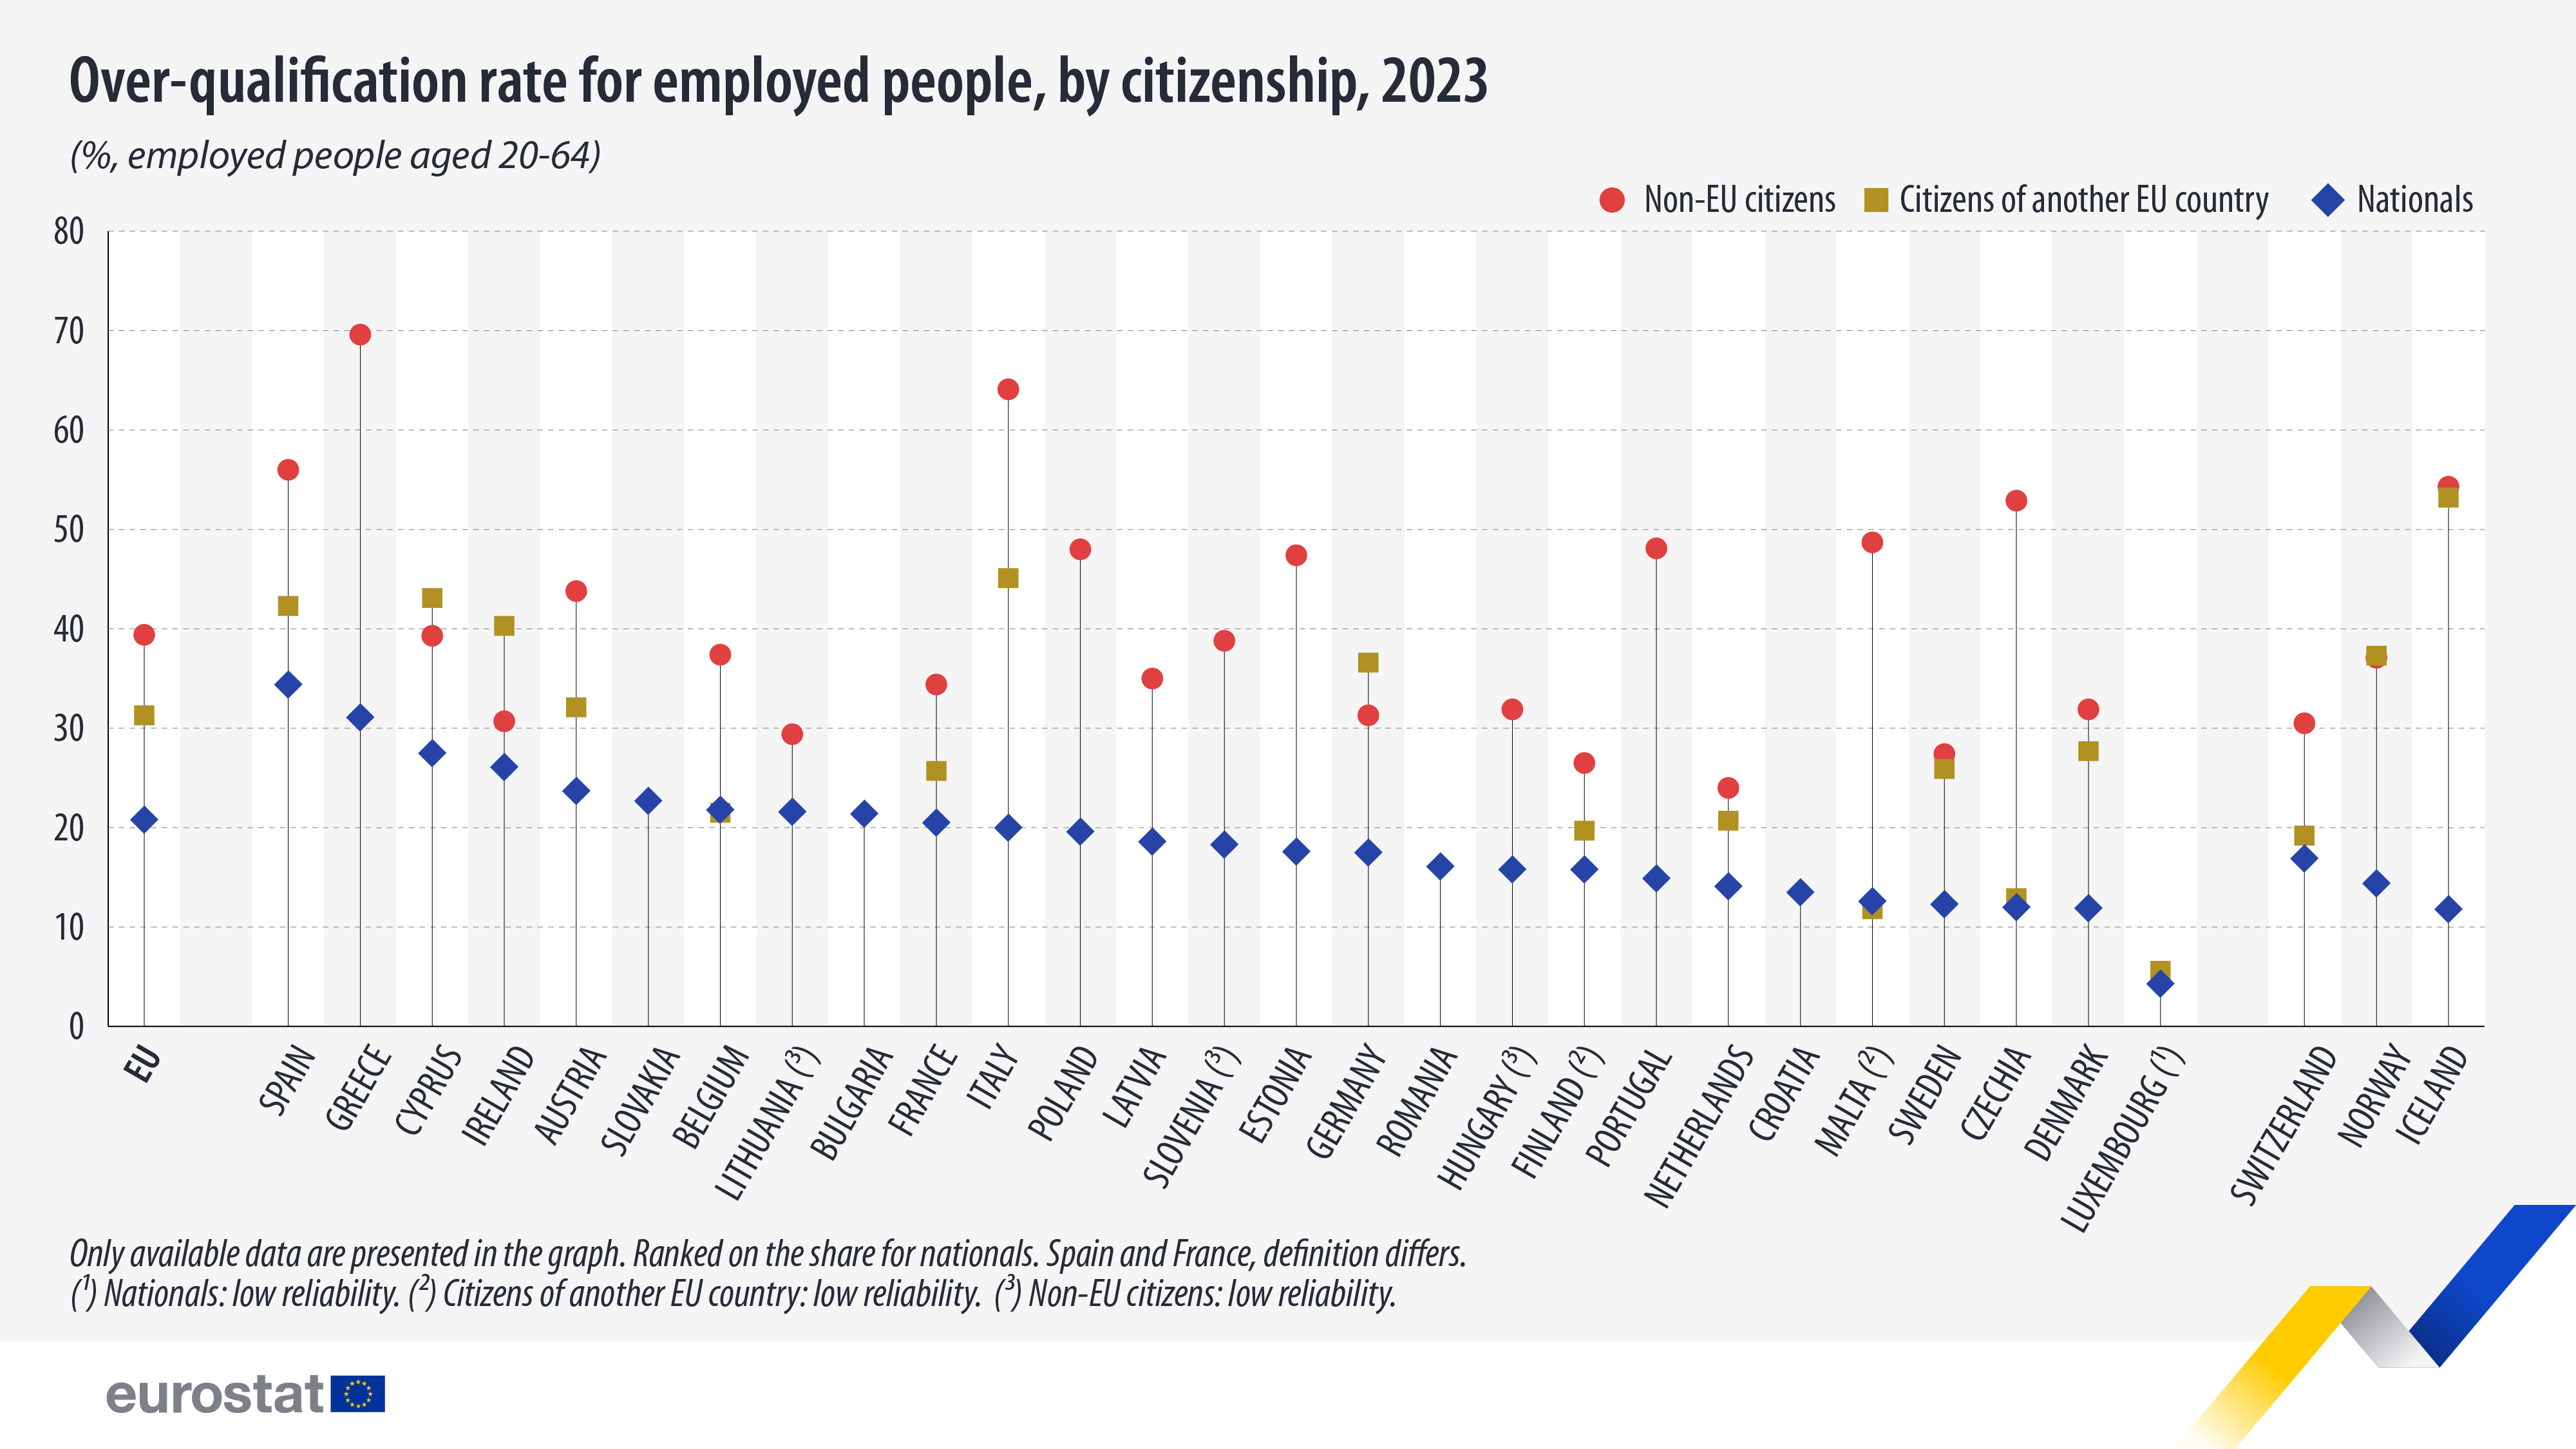 Over-qualification rate for employed people, by citizenship, 2023. Bar chart. See link to full dataset below.